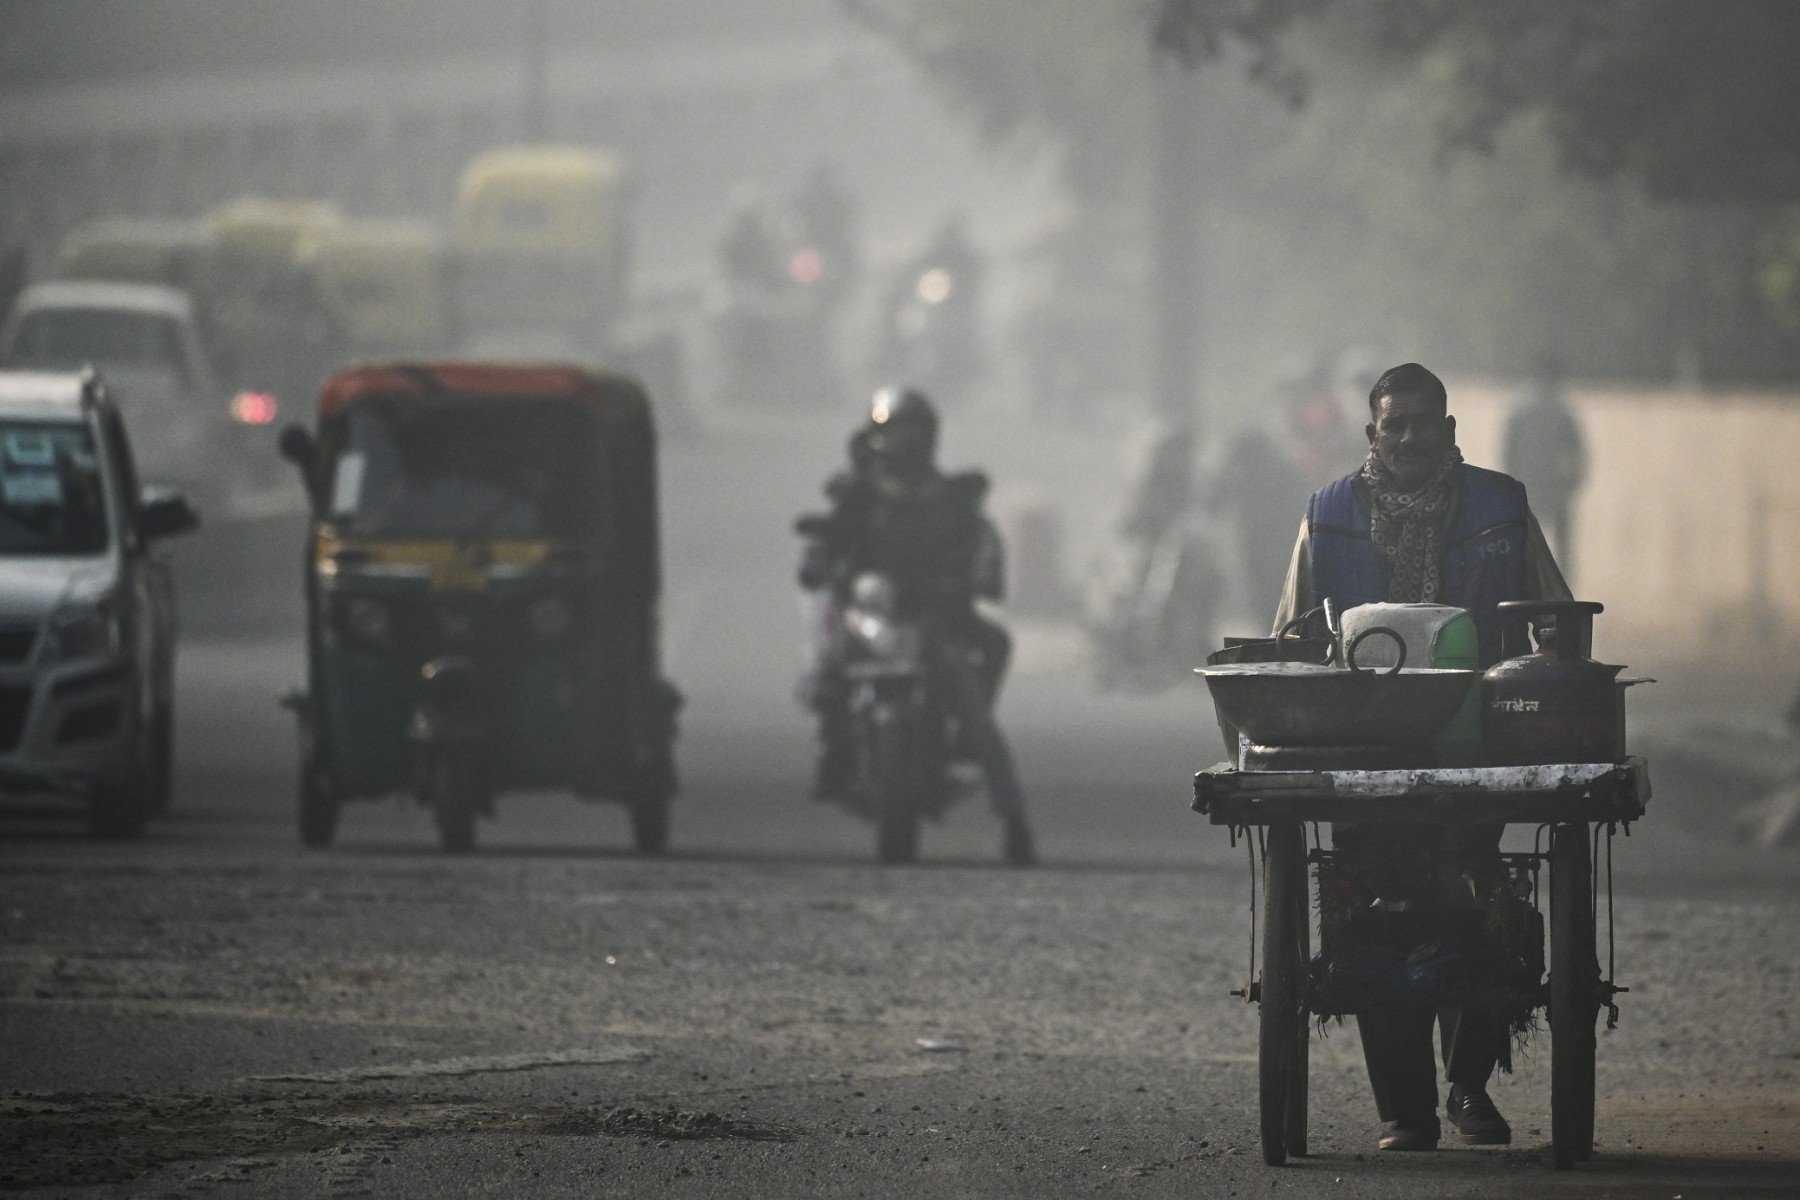 A street food vendor pushes his cart along a road amid smoggy conditions in New Delhi on Dec 23, 2021. Photo: AFP